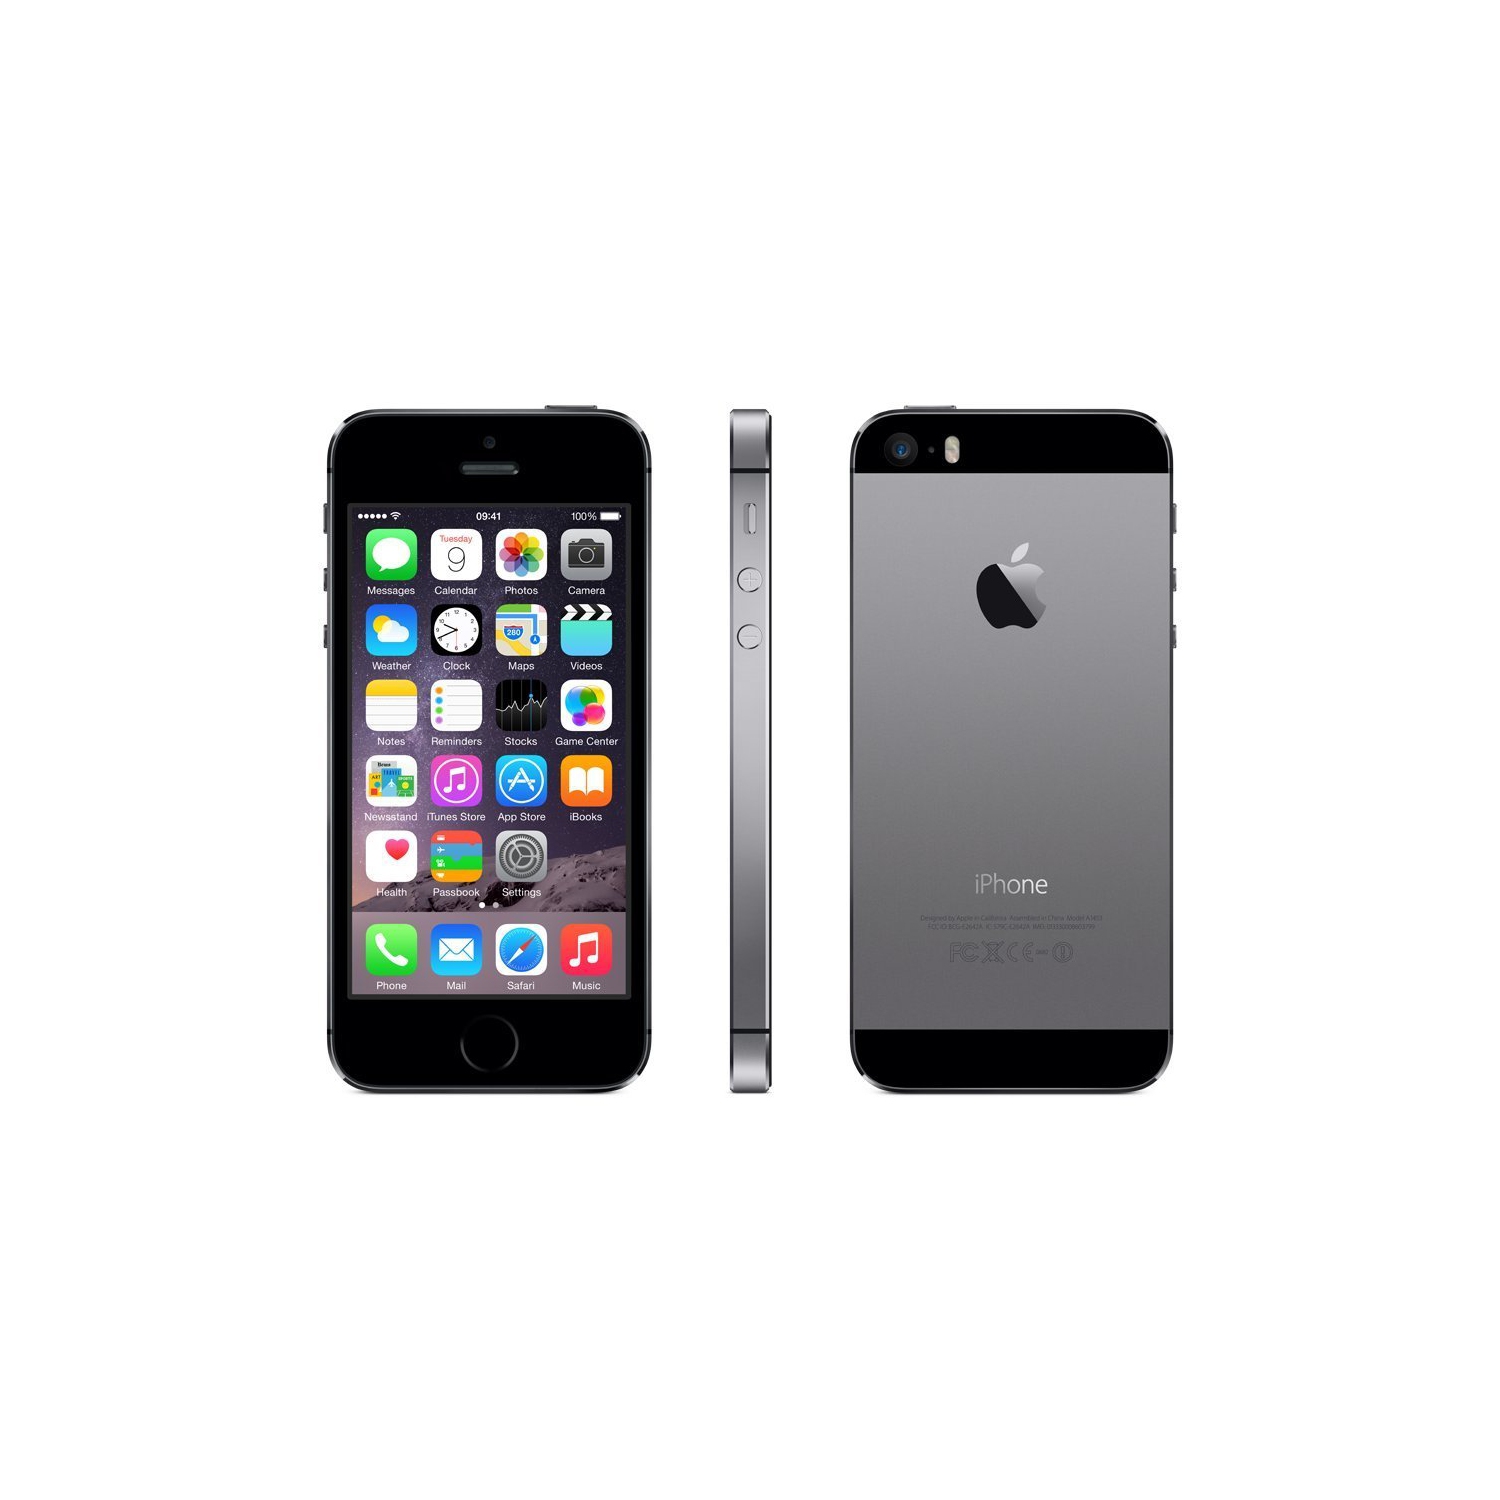 Refurbished (Fair) Apple iPhone 5s A1533 (GSM Unlocked) 16GB Space Gray